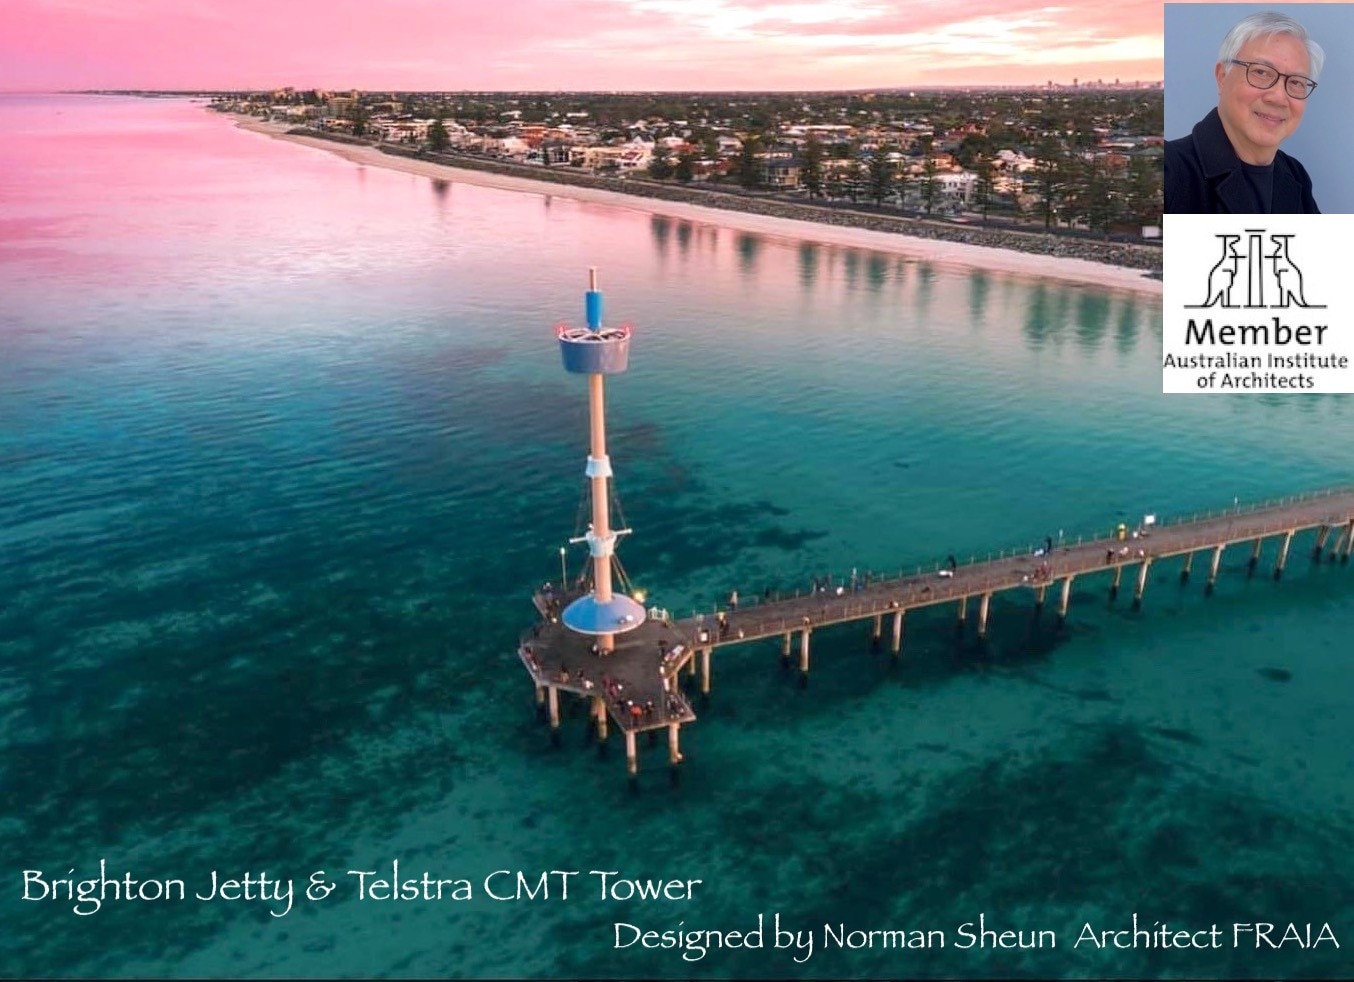 Brighton Jetty & Telstra CMT Tower was one of Norman Sheun's earlier Governemnt progjects.